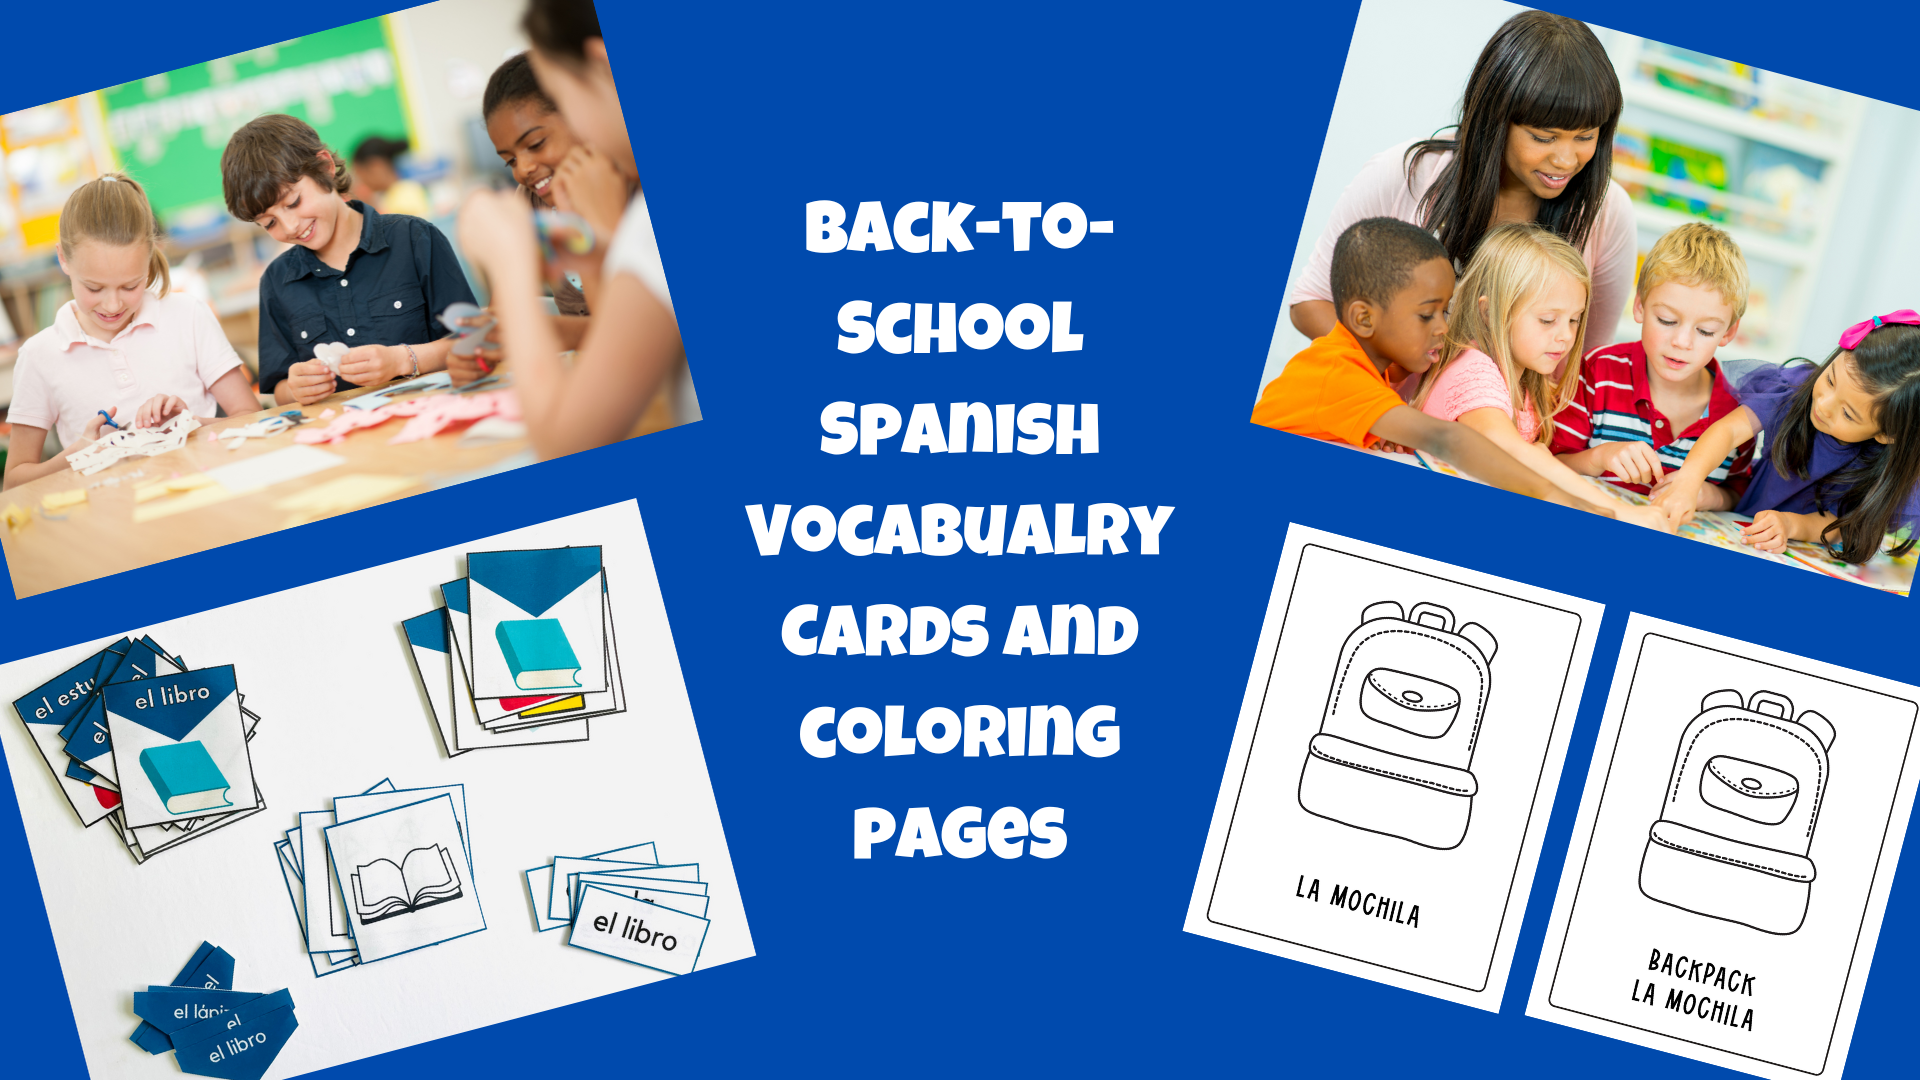 Back-to-School Spanish vocabulary cards and Coloring Pages.